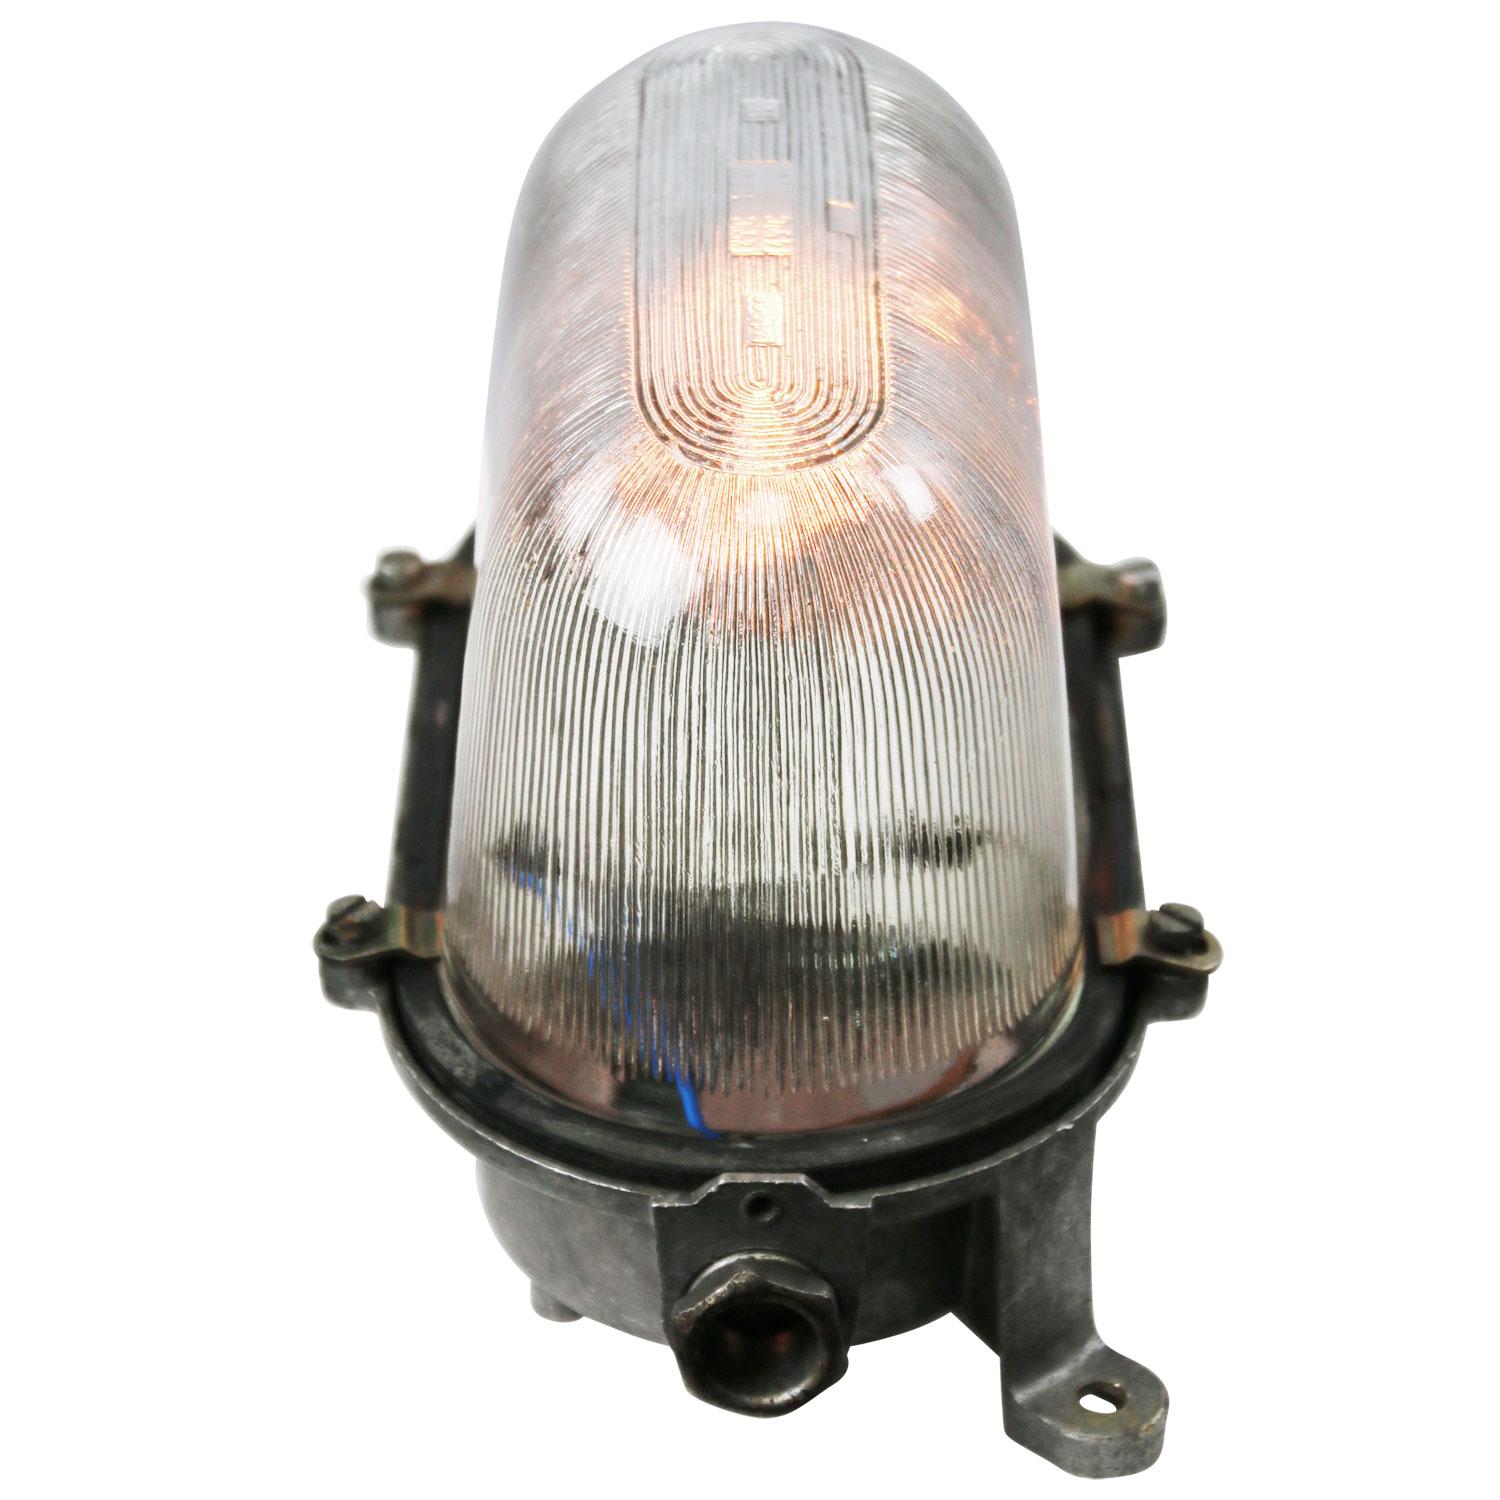 Industrial wall, scone or ceiling lamp
Cast aluminium, Holophane glass

Weight: 1.40 kg / 3.1 lb

Priced per individual item. All lamps have been made suitable by international standards for incandescent light bulbs, energy-efficient and LED